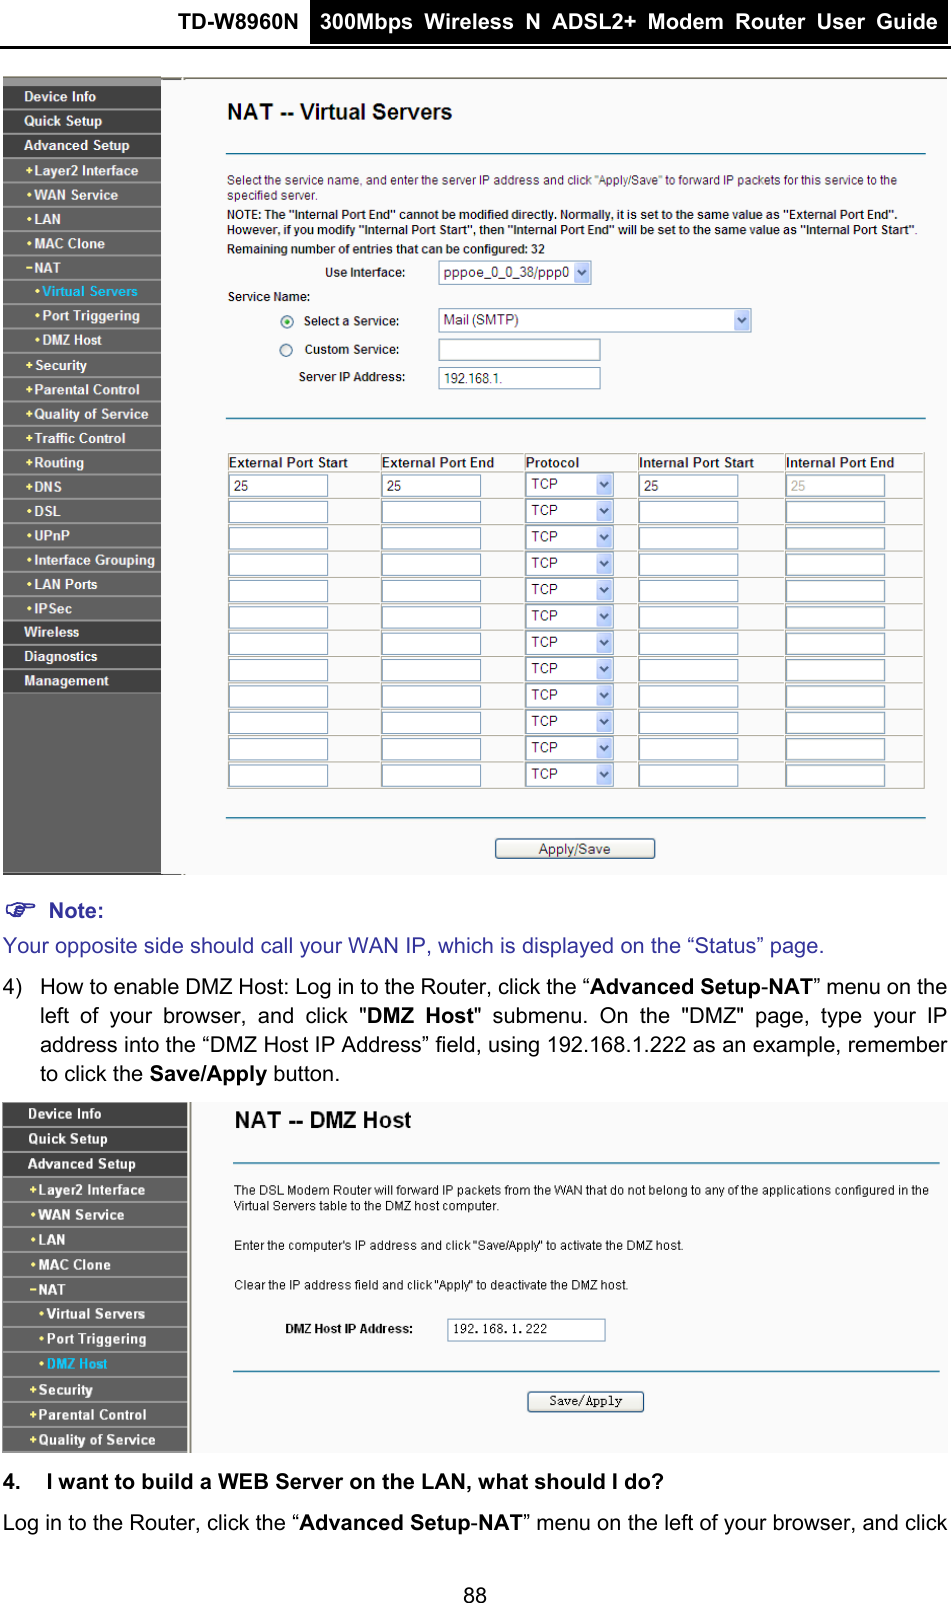 TD-W8960N  300Mbps Wireless N ADSL2+ Modem Router User Guide    Note: Your opposite side should call your WAN IP, which is displayed on the “Status” page. 4)  How to enable DMZ Host: Log in to the Router, click the “Advanced Setup-NAT” menu on the left of your browser, and click &quot;DMZ Host&quot; submenu. On the &quot;DMZ&quot; page, type your IP address into the “DMZ Host IP Address” field, using 192.168.1.222 as an example, remember to click the Save/Apply button.    4.  I want to build a WEB Server on the LAN, what should I do? Log in to the Router, click the “Advanced Setup-NAT” menu on the left of your browser, and click 88 